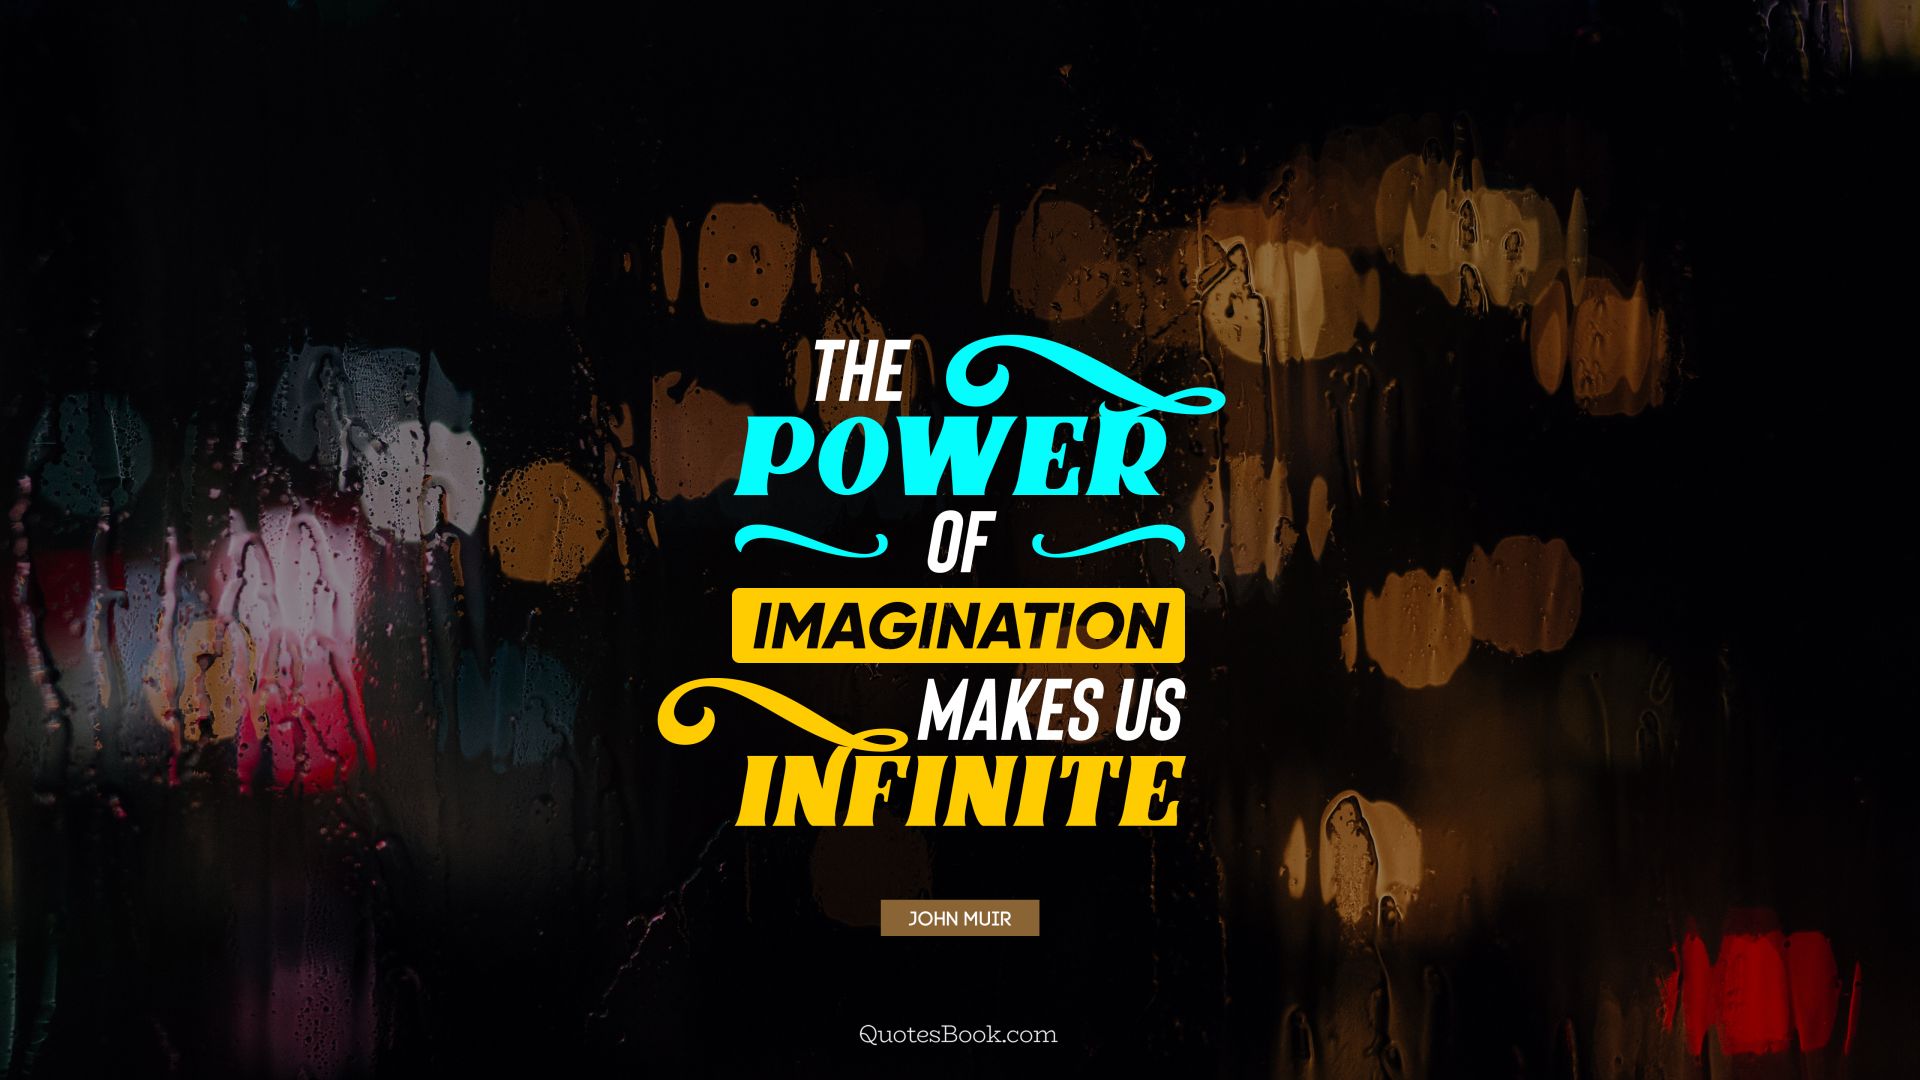 The power of imagination makes us infinite. - Quote by John Muir